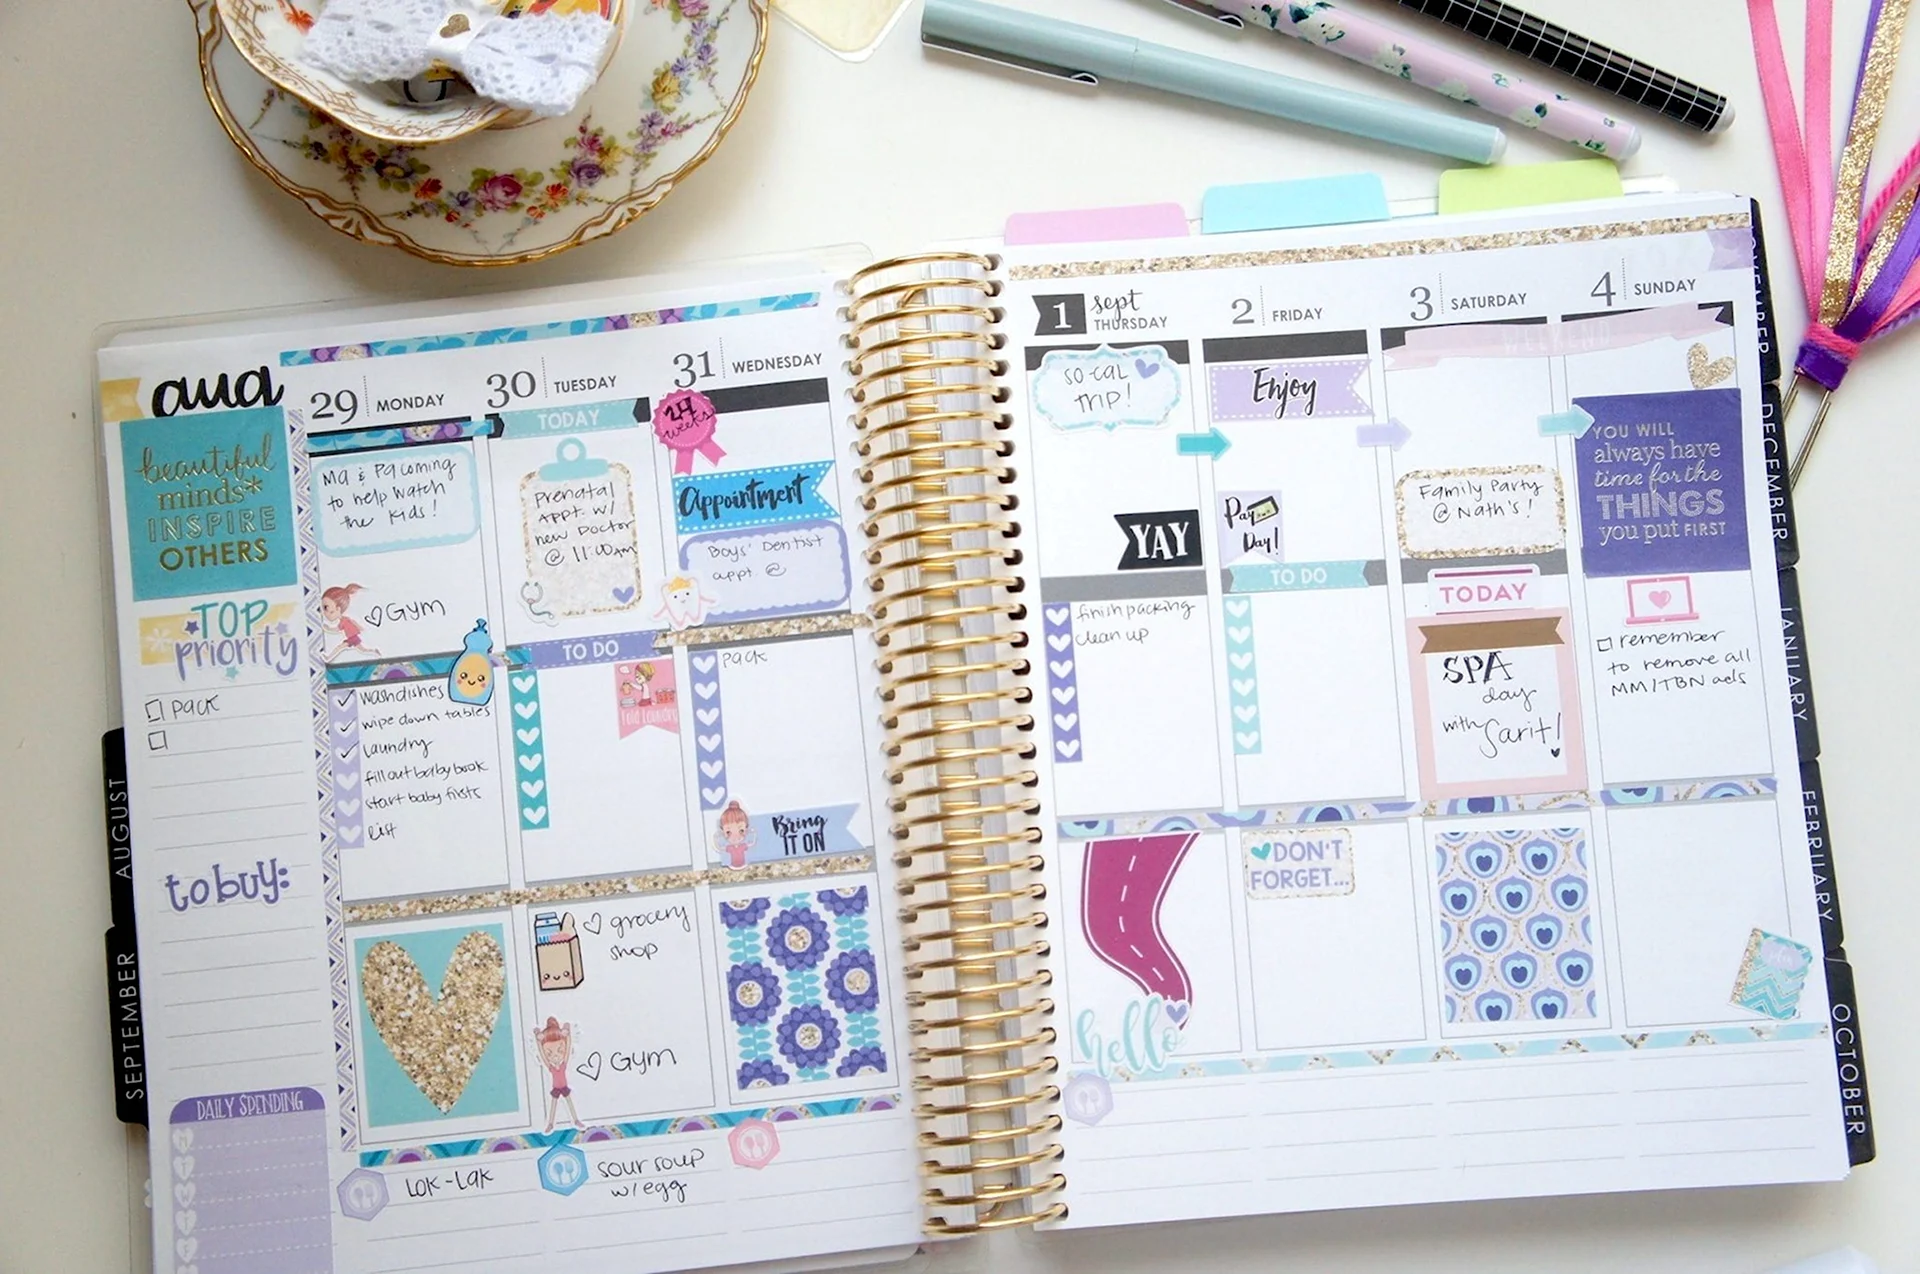 Daily Planner ideas